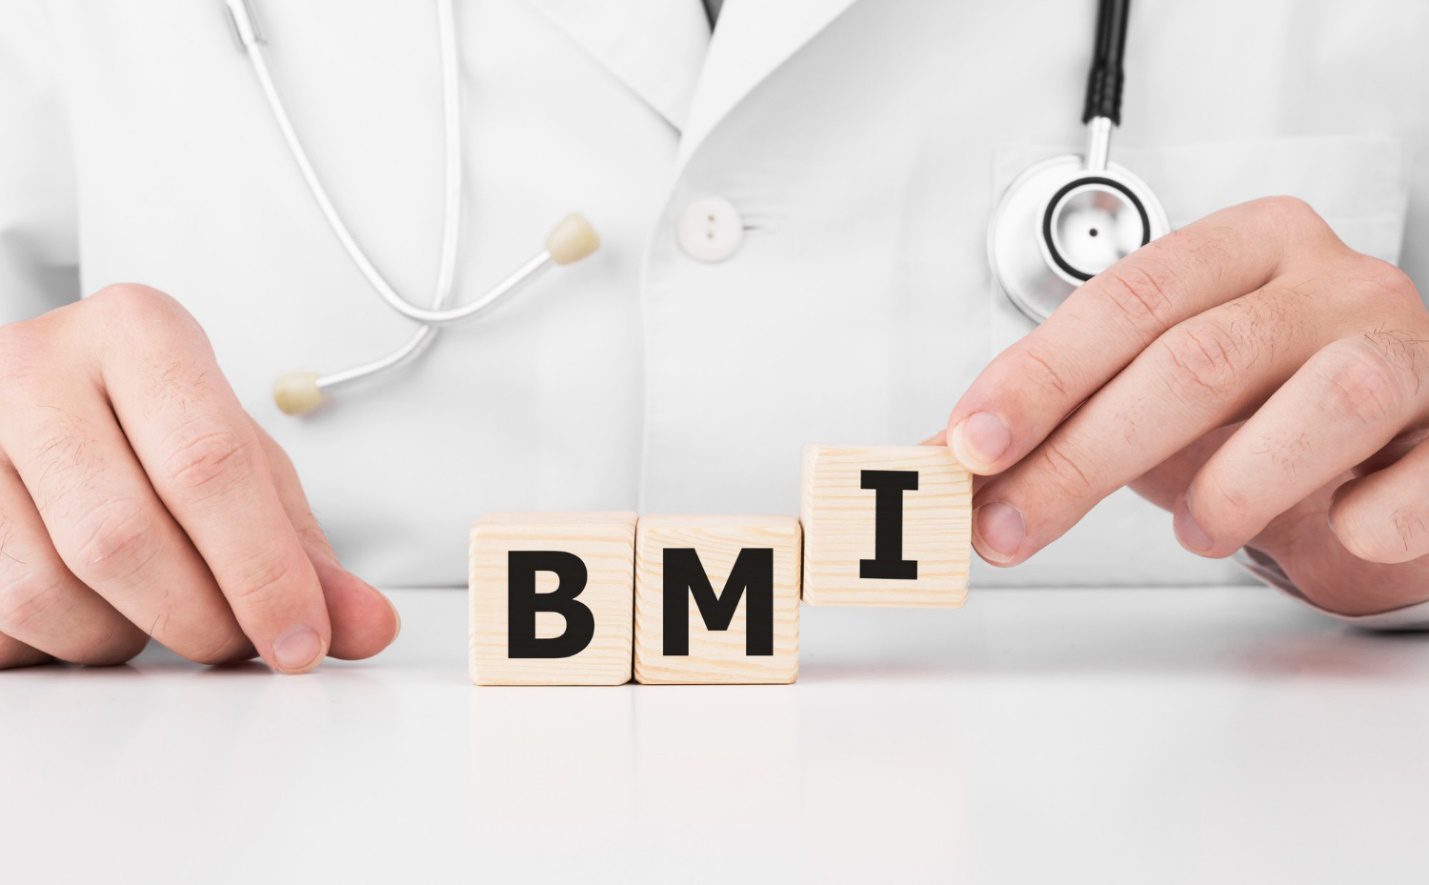 C:\Users\Dell\Downloads\doctor-holds-wooden-cubes-his-hands-with-text-bmi.jpg